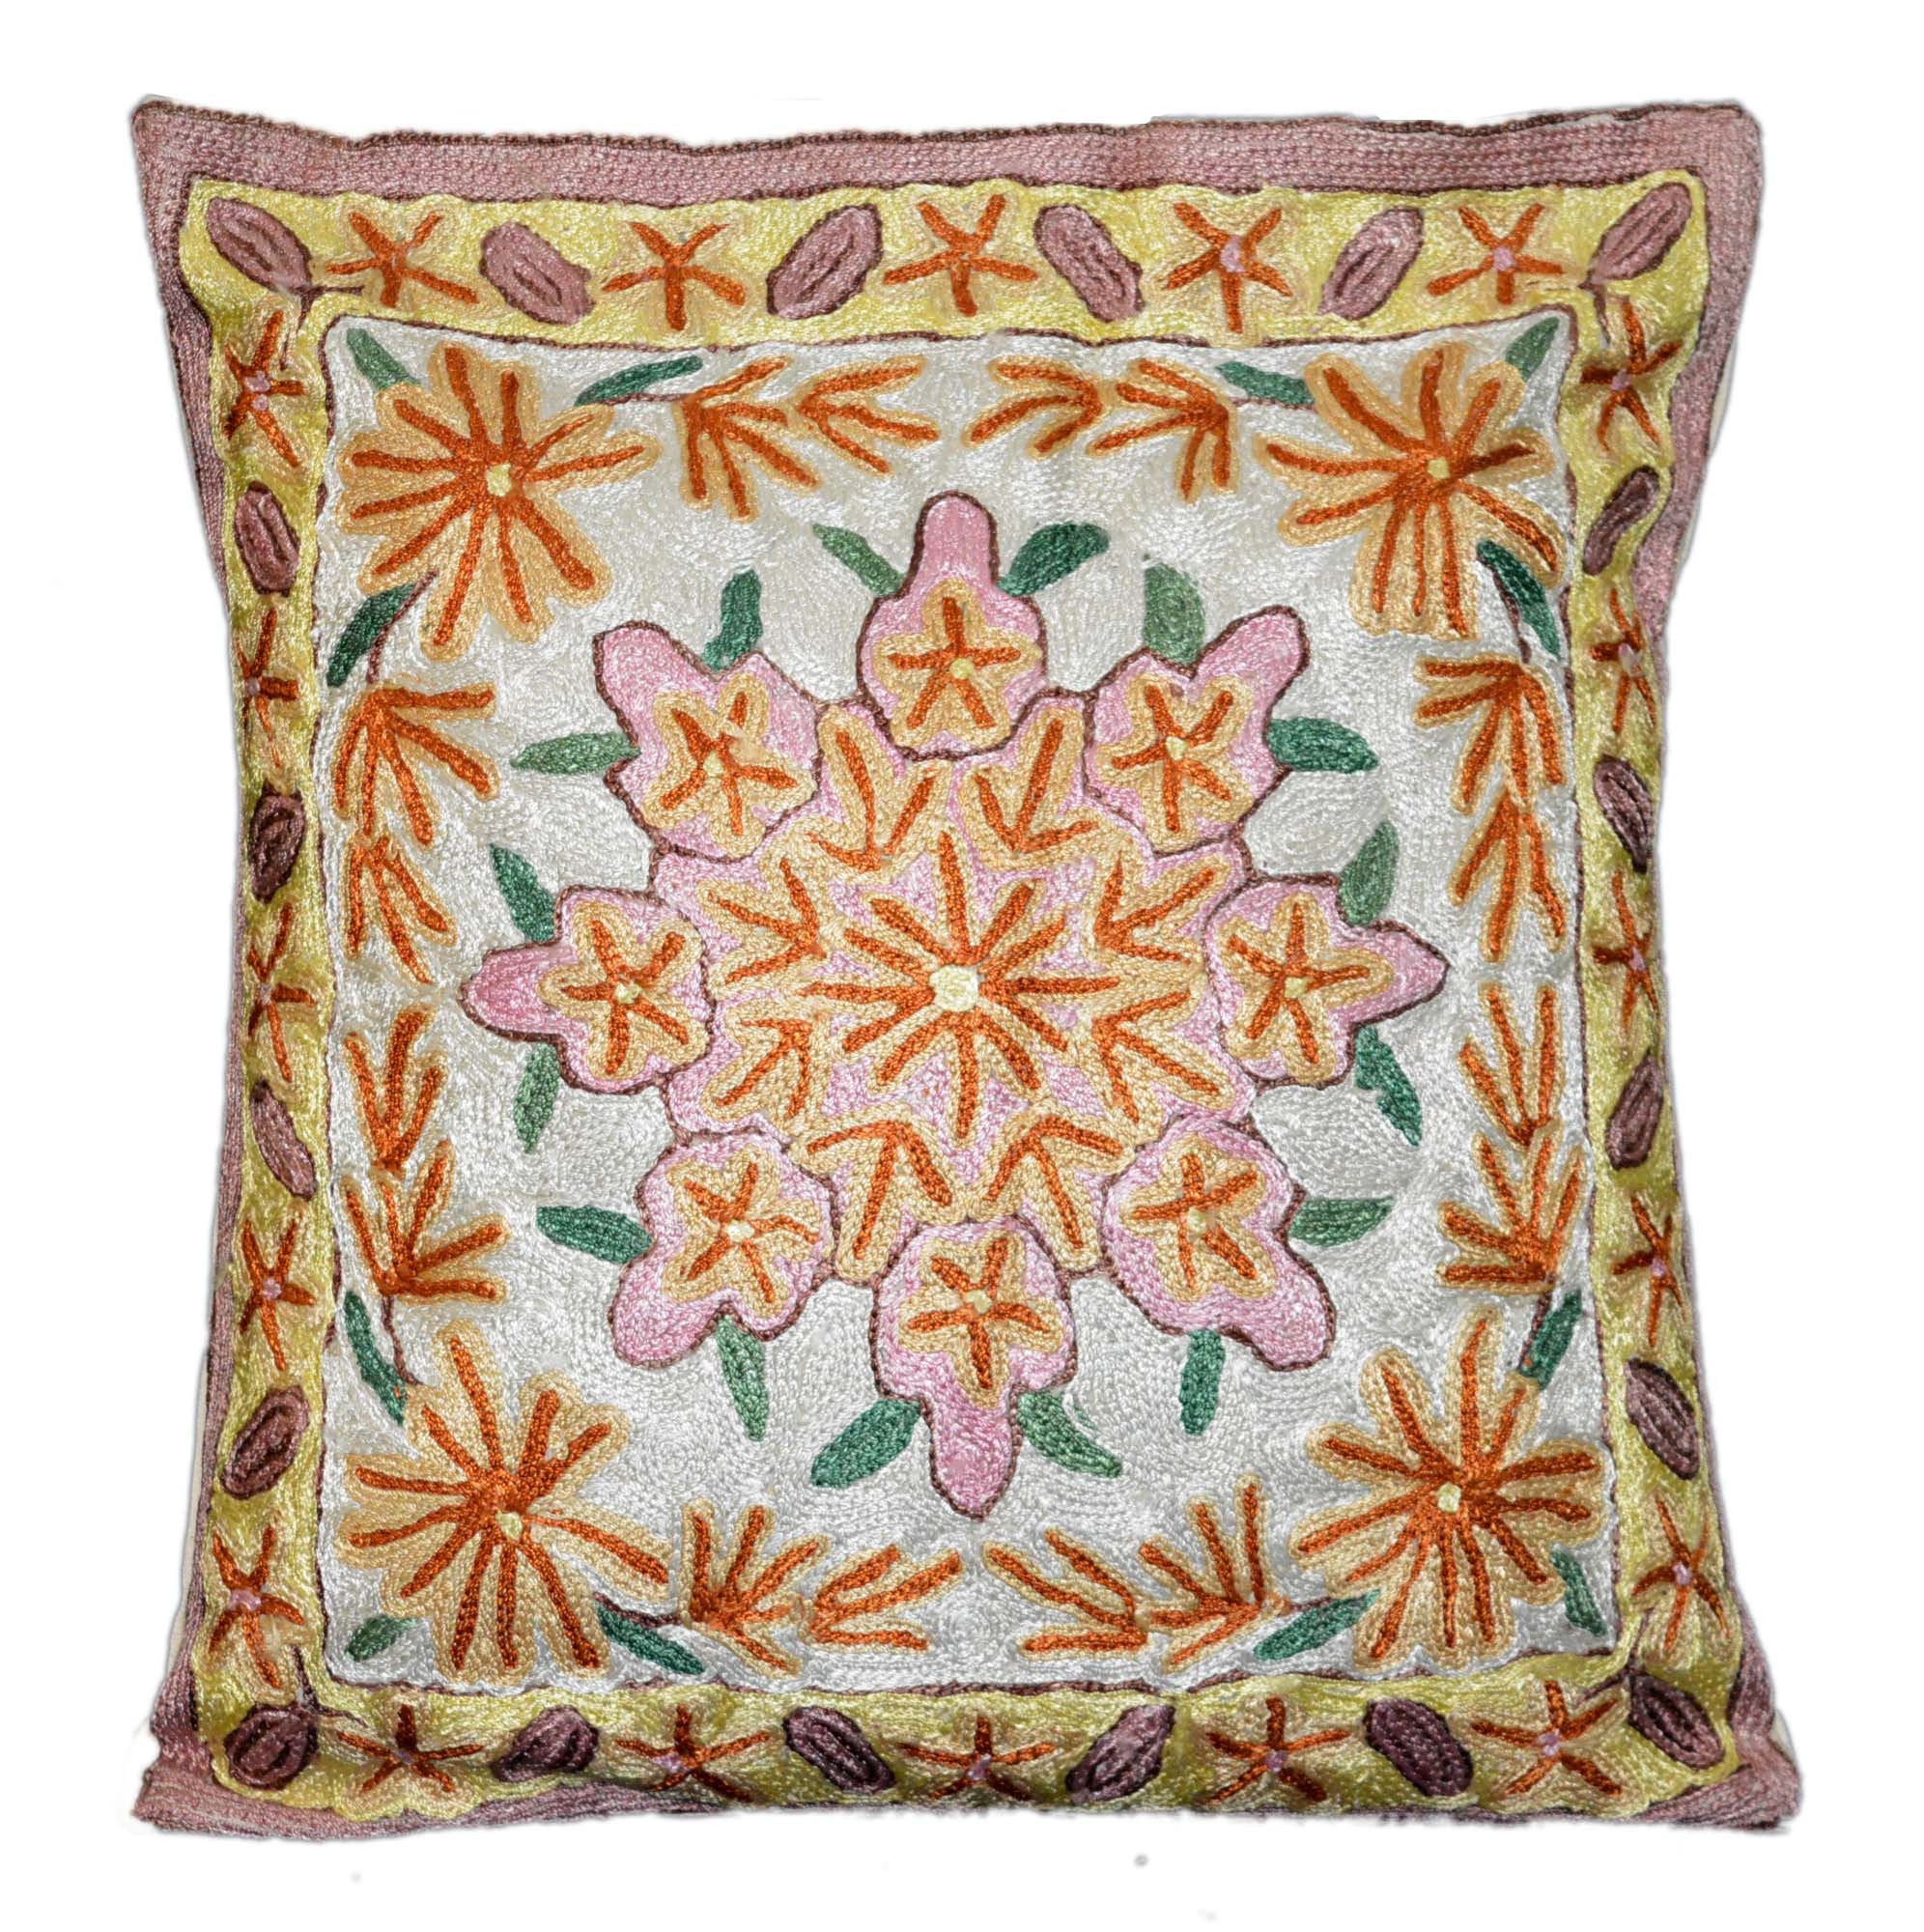 Crewel Sillk Embroidered Cushion Throw Pillow Cover, Multicolor #CW2007